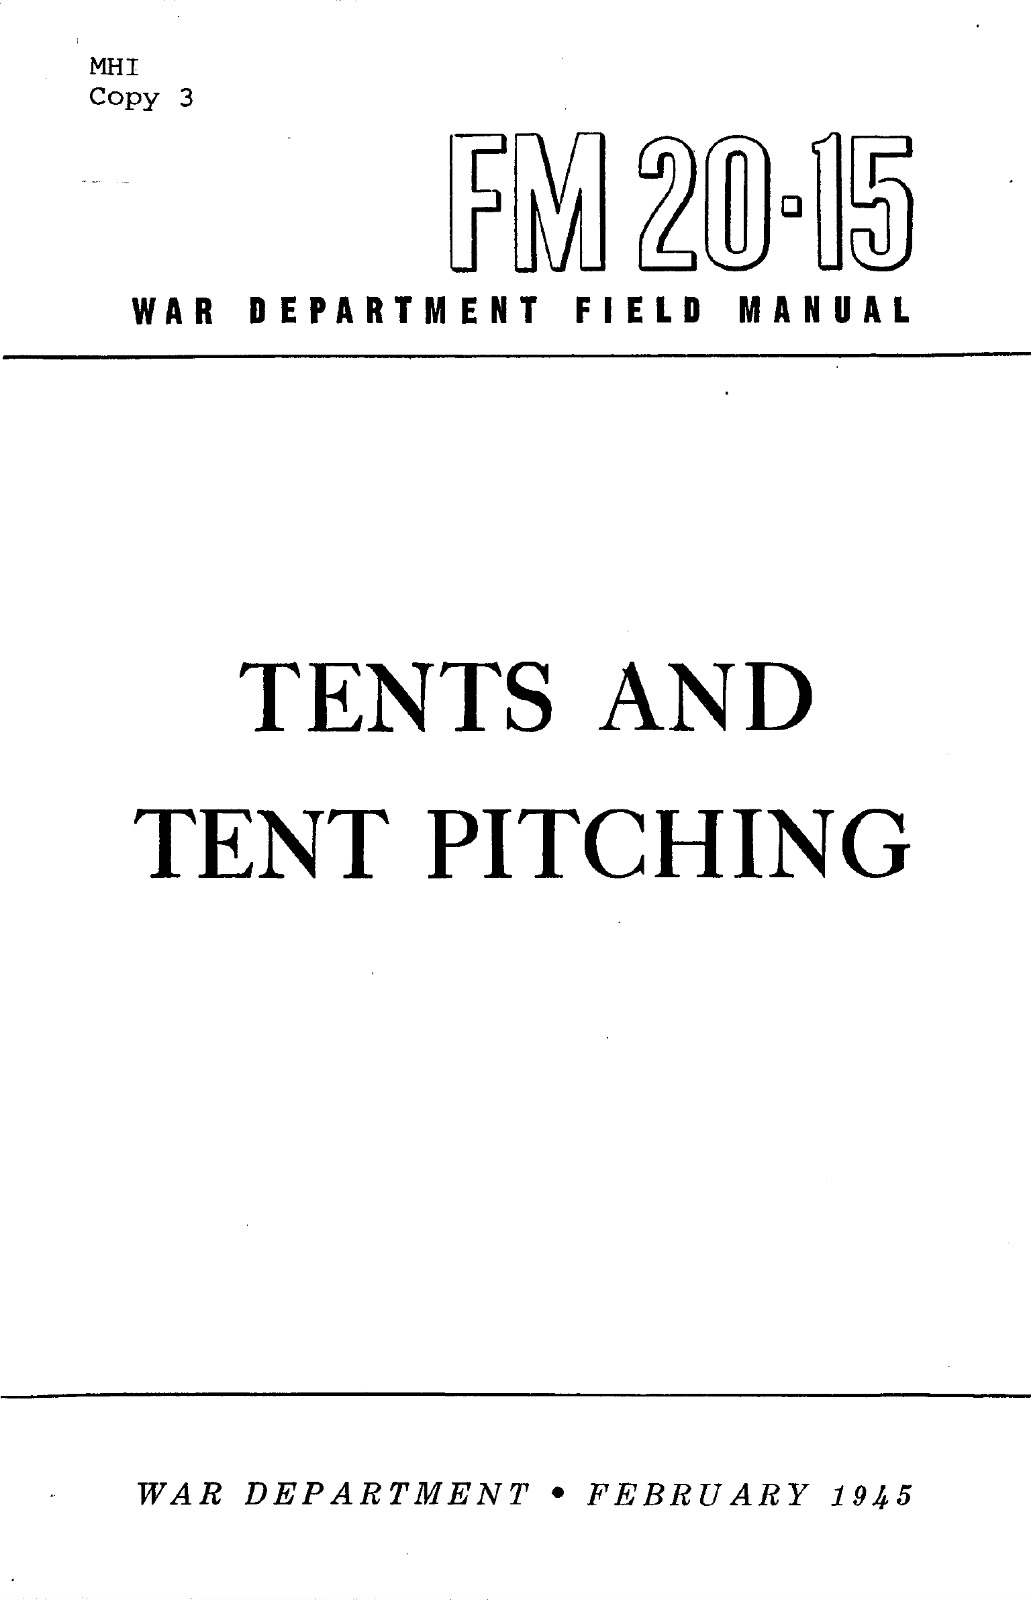 81 Page February 1945 FM 20-15 Tents and Tent Pitching Manual on CD